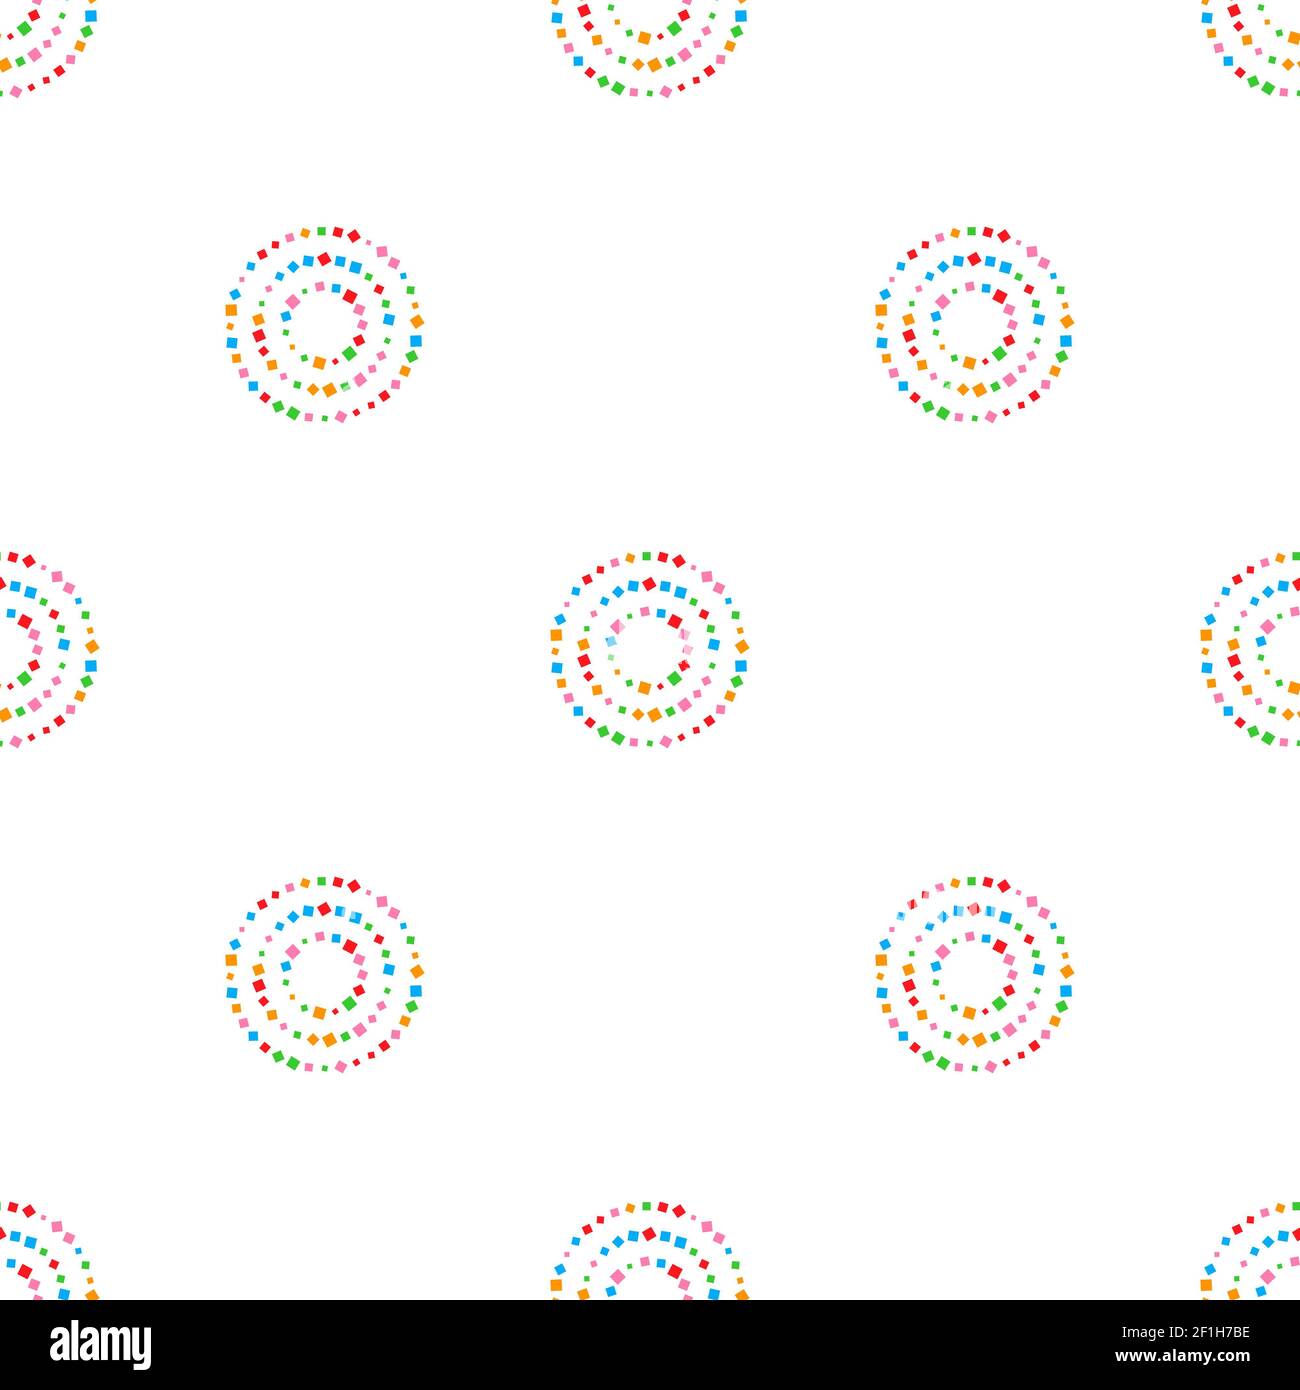 Colorful seamless circles pattern on white background Stock Photo